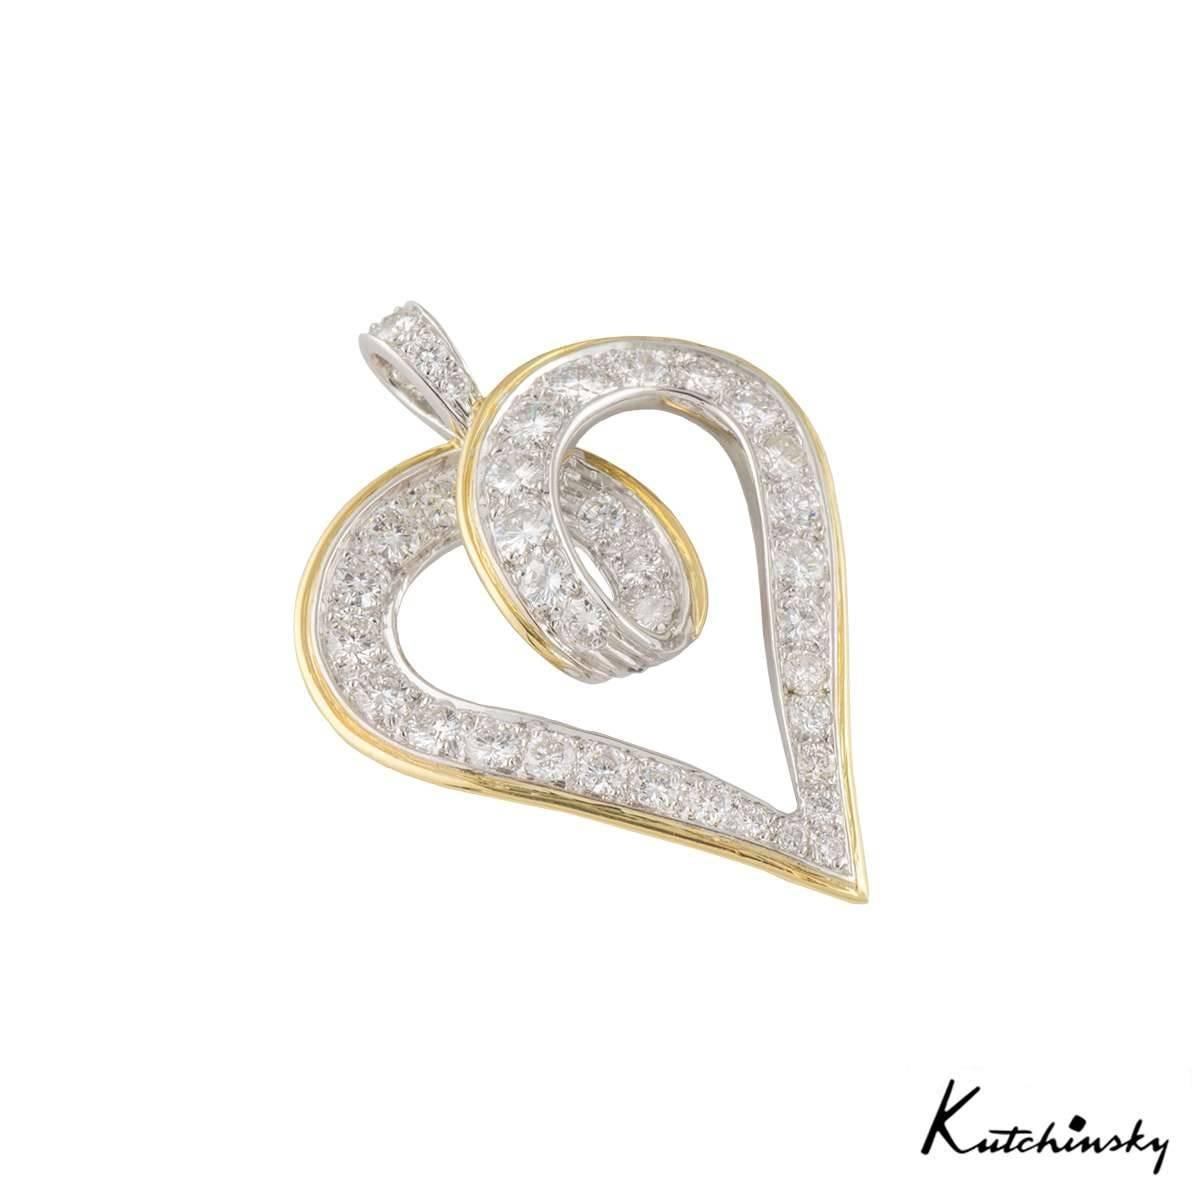 An 18k white & yellow gold heart shape pendant by Kutchinsky. The openwork heart motif displays a boarder of yellow gold and is set with 37 round brilliant cut diamonds totalling approximately 1.47ct, predominantly F colour and VVS-VS in clarity.